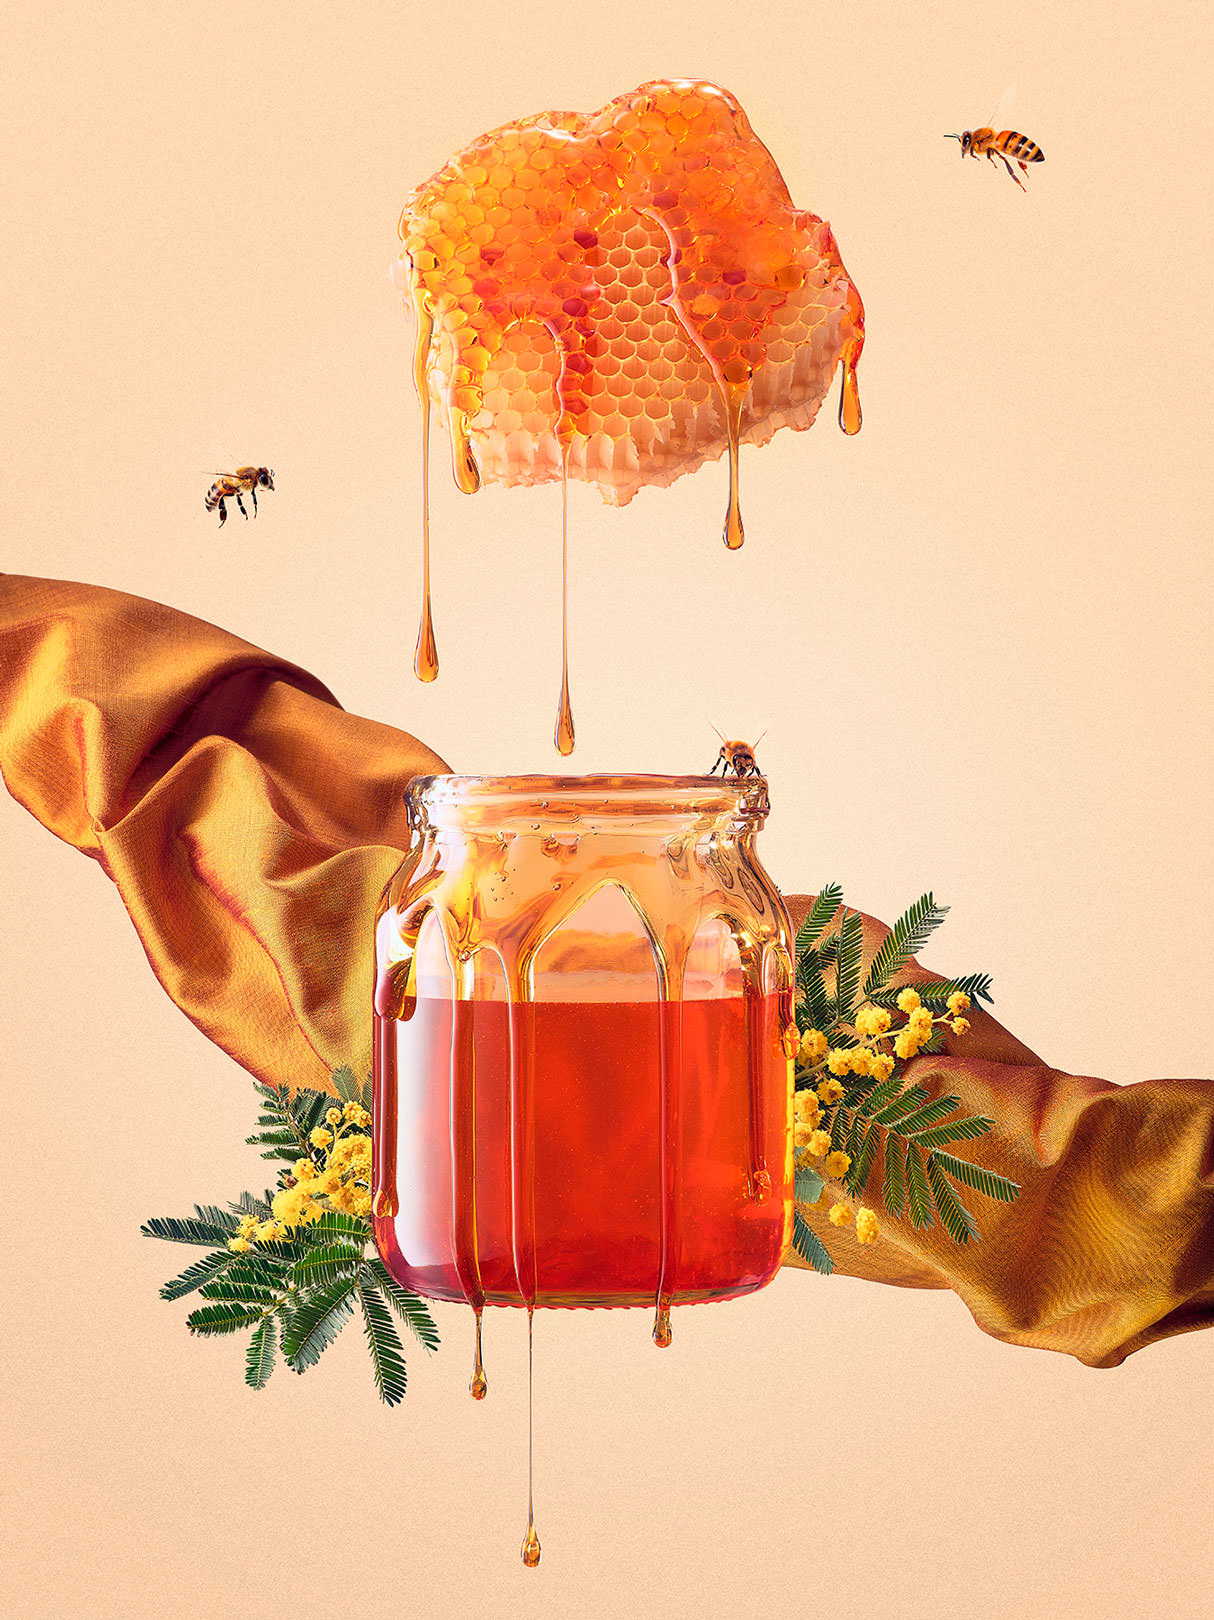 Honey comb dripping honey into a jar with bees flying around - honey photography